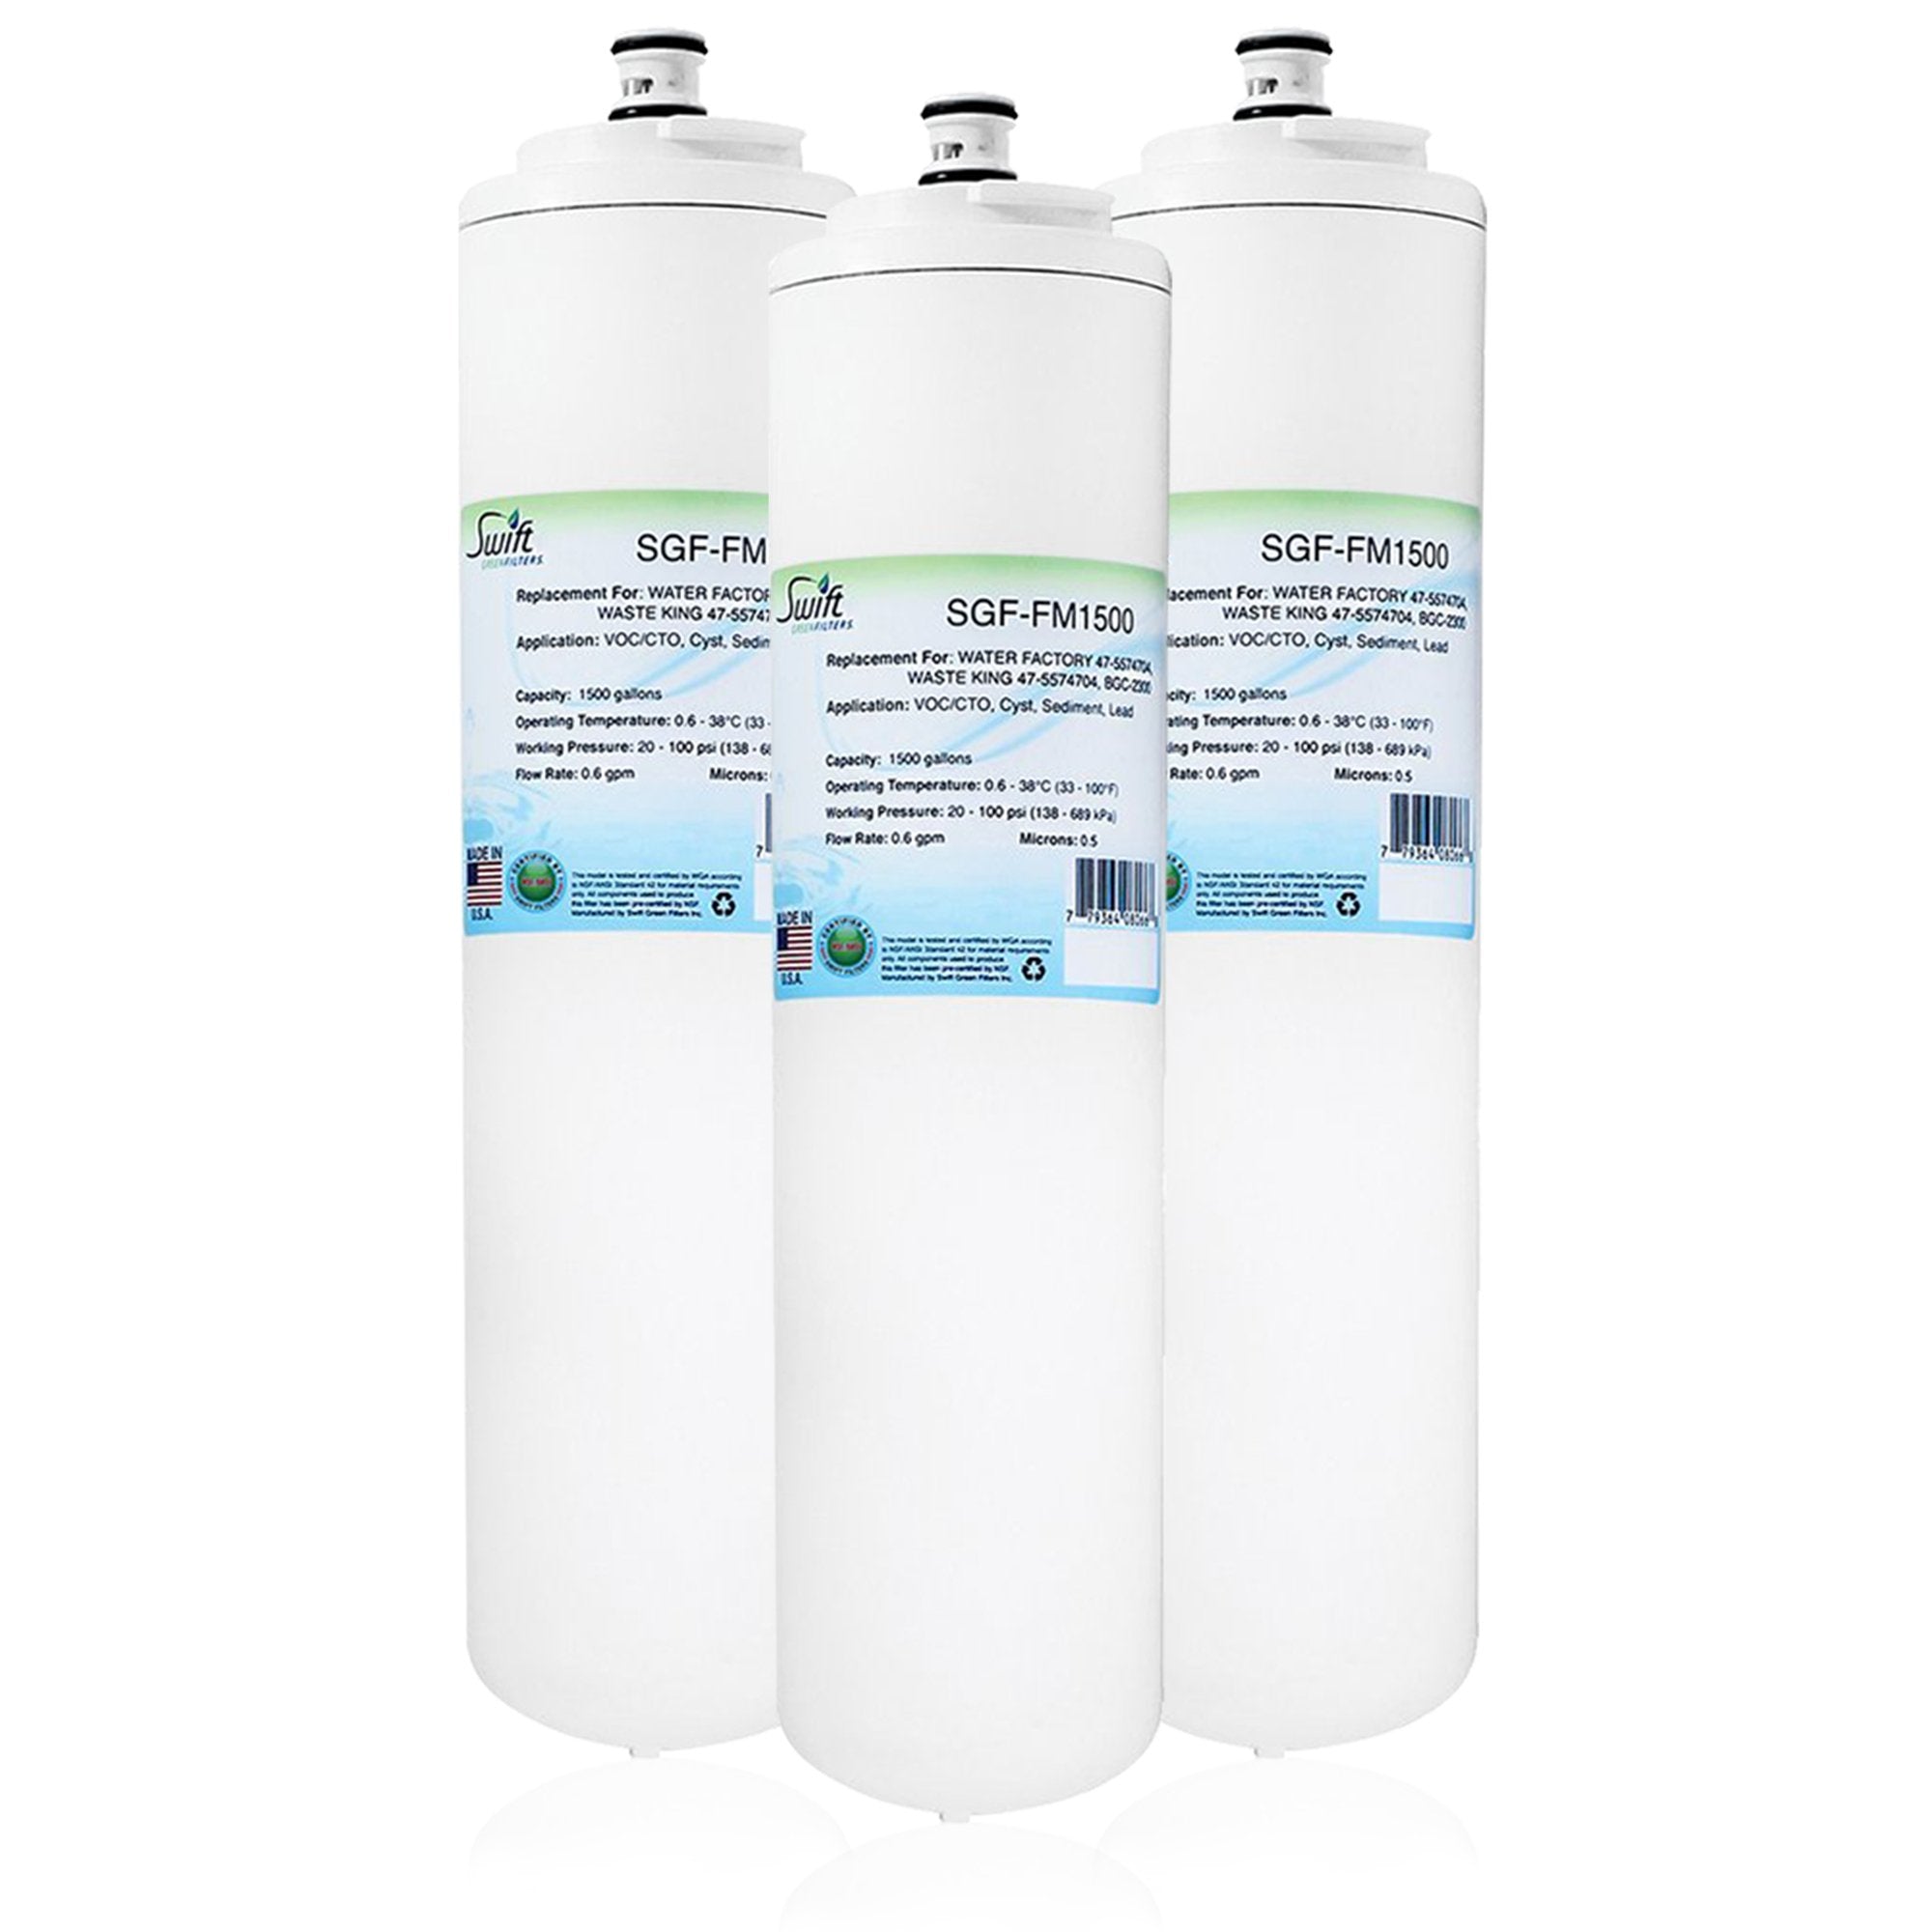 Replacement for 3M Water Factory 47-5574704 Filter by Swift Green Filters SGF-FM1500